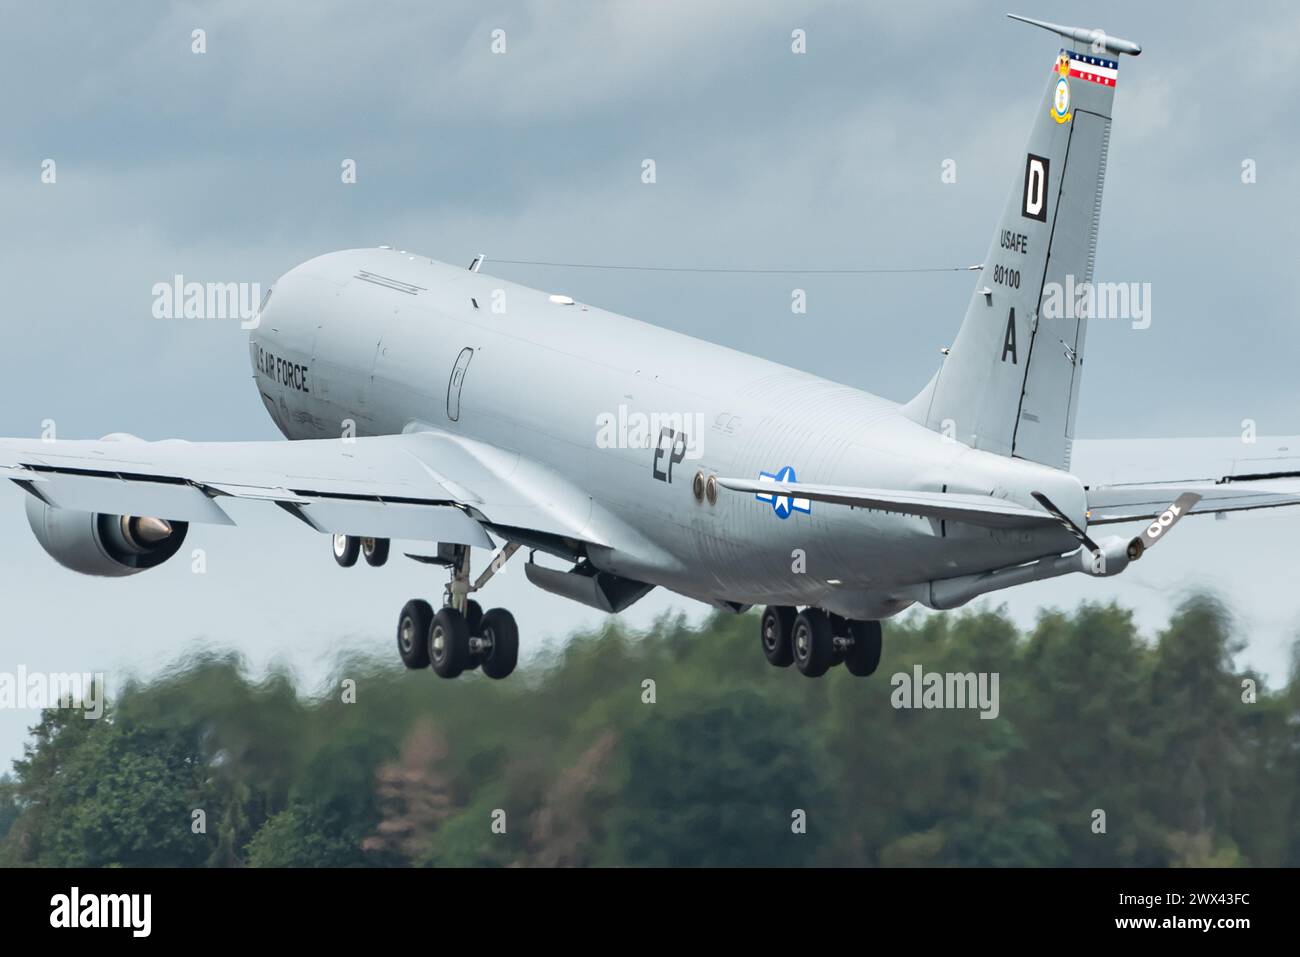 A Boeing KC-135 Stratotanker aerial refueling tanker aircraft of the USAF. Stock Photo